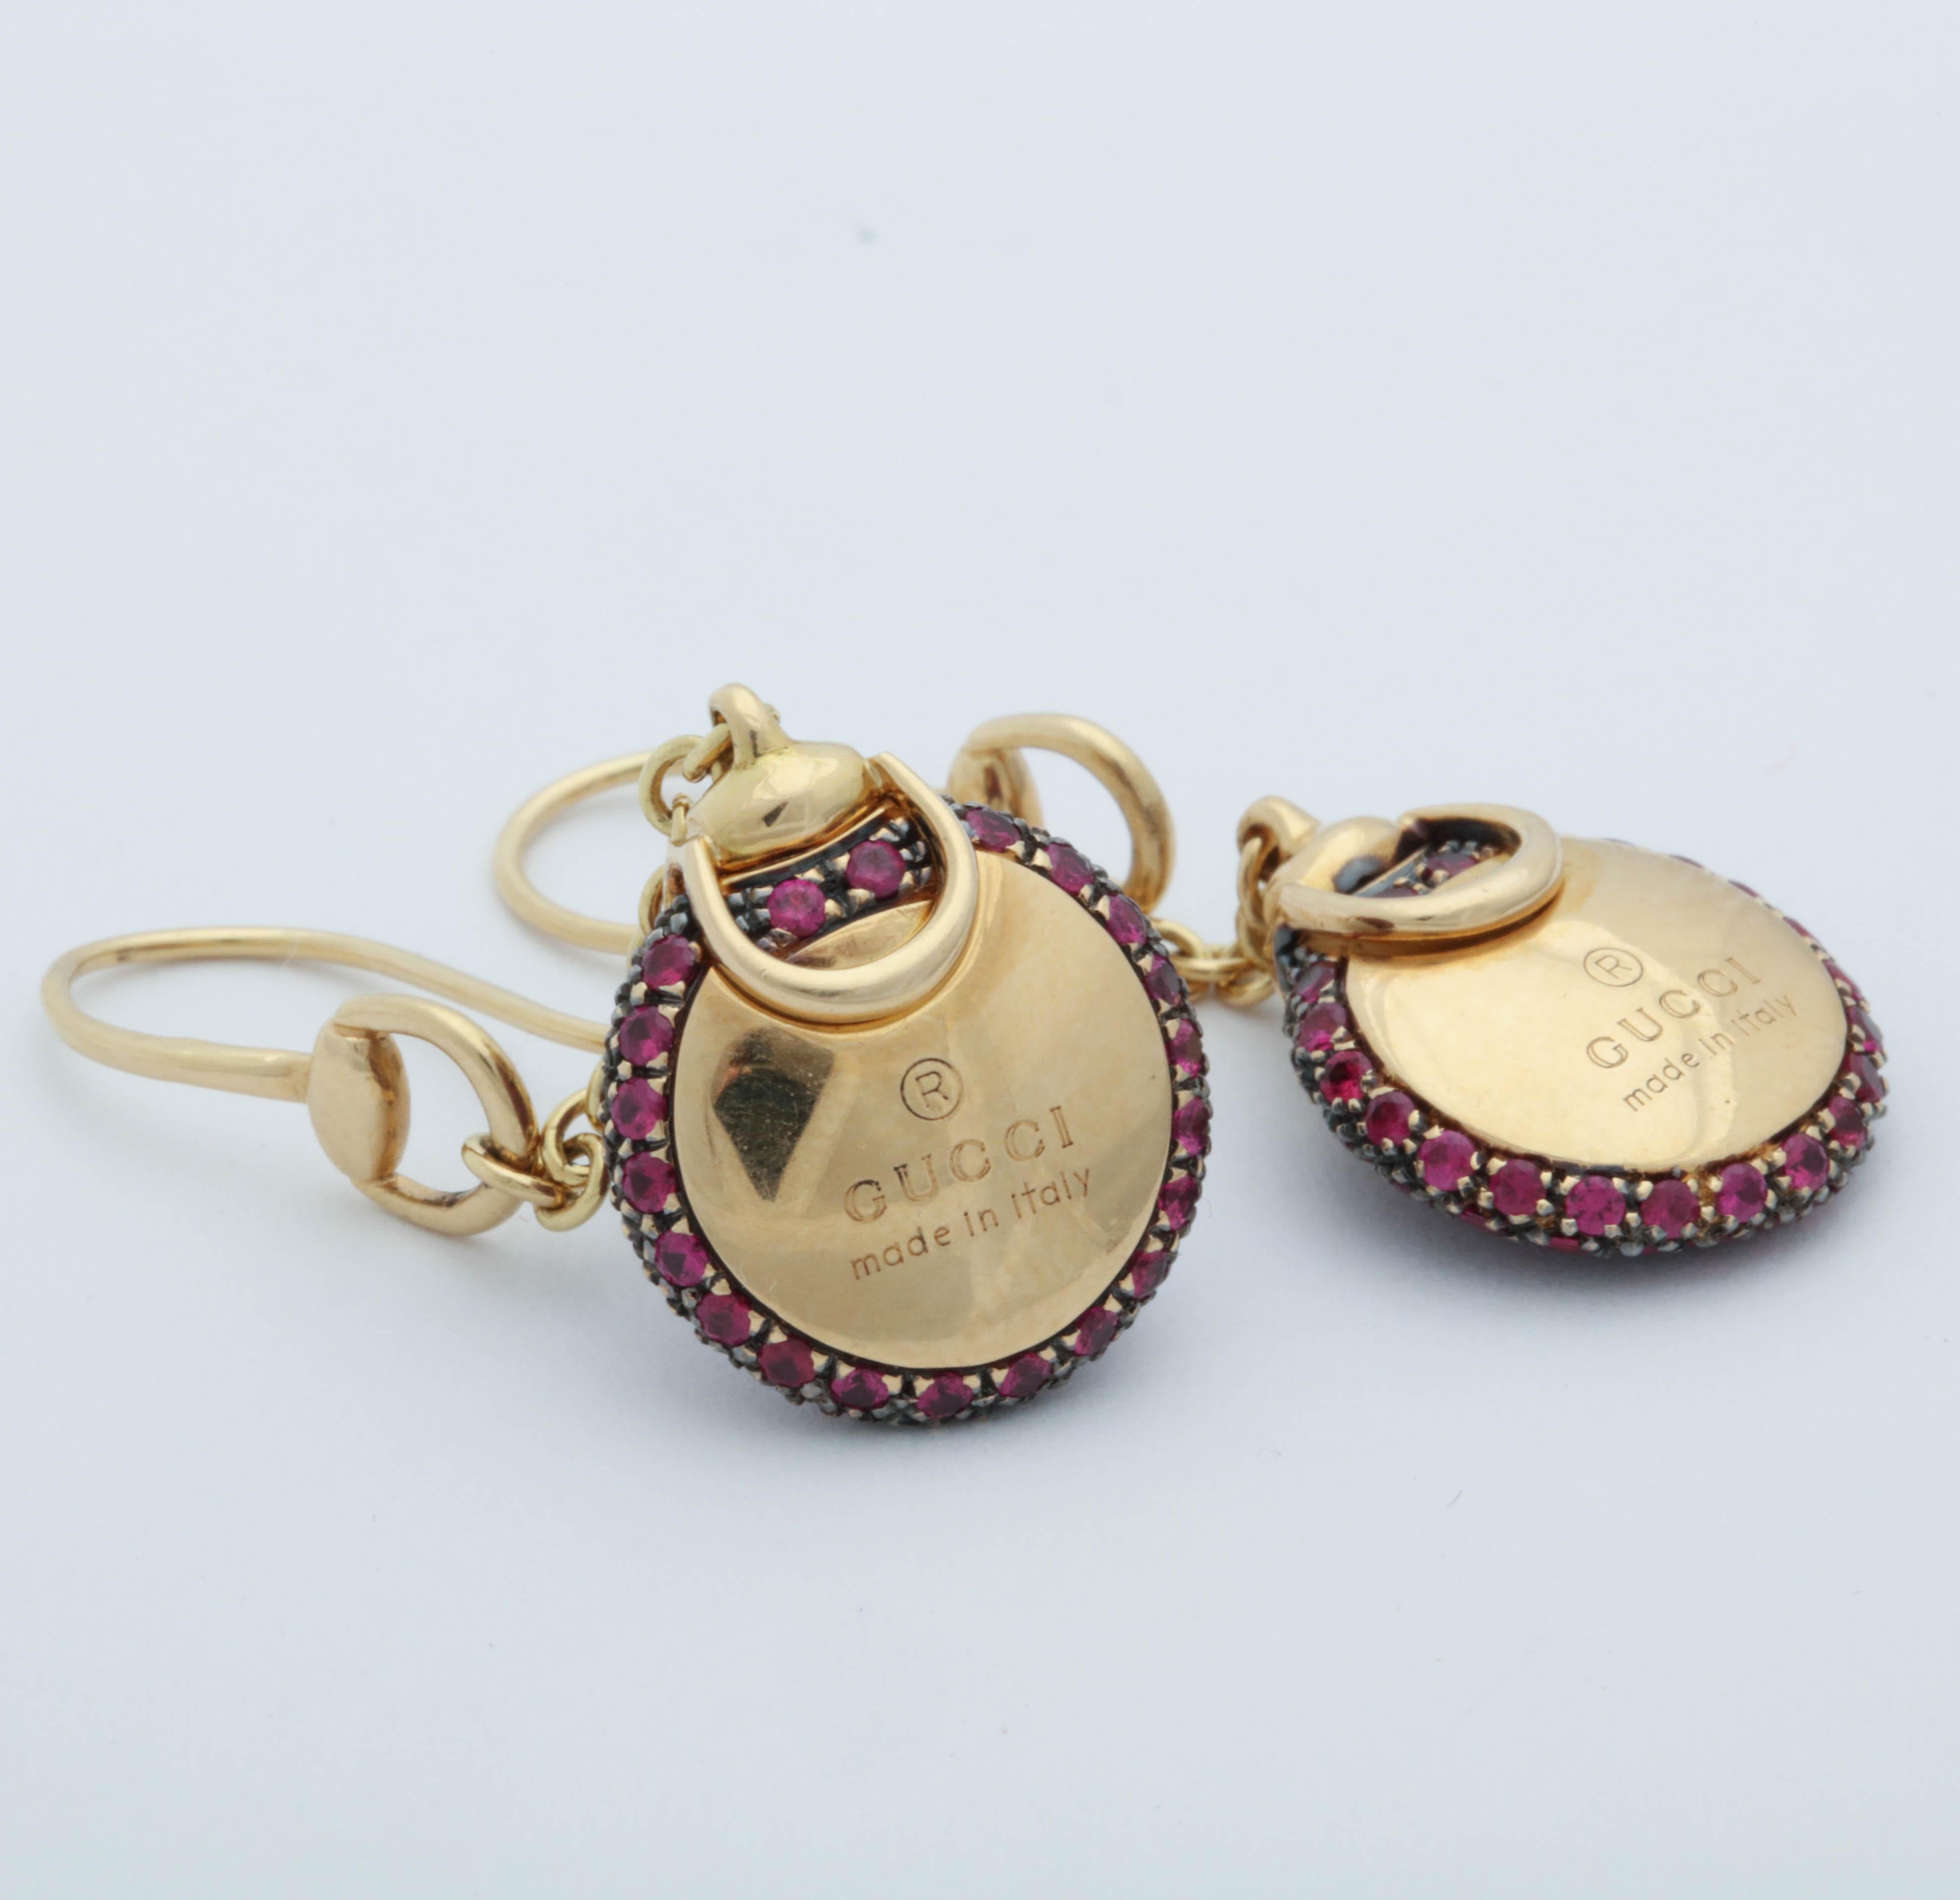 1990s Gucci Ruby and Gold Pendant Drop Earrings with Shephards Hook Closures 2